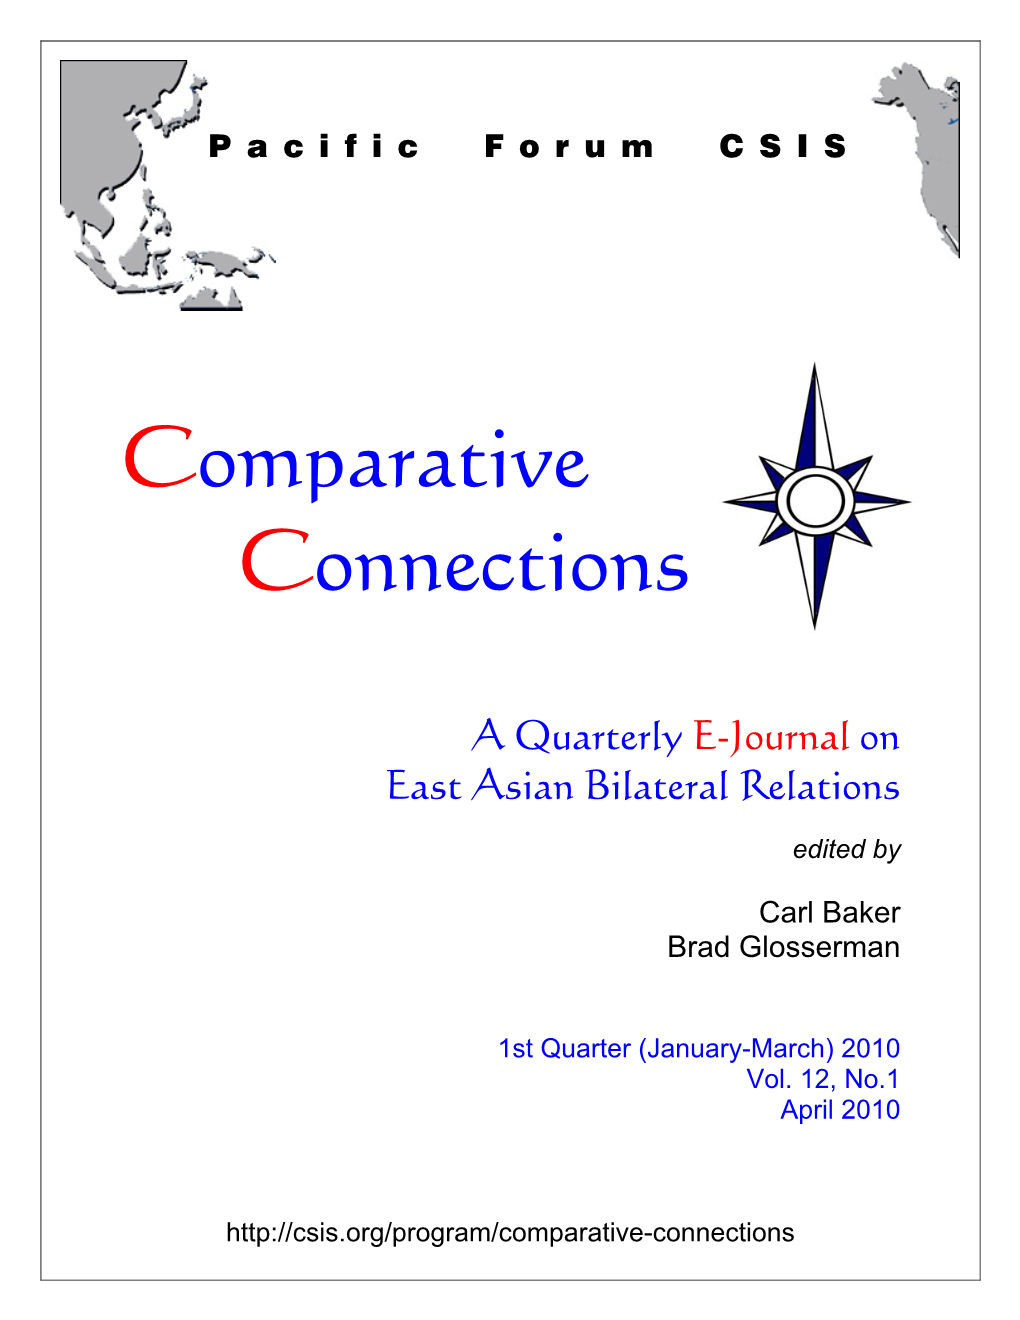 Comparative Connections, Volume 12, Number 1